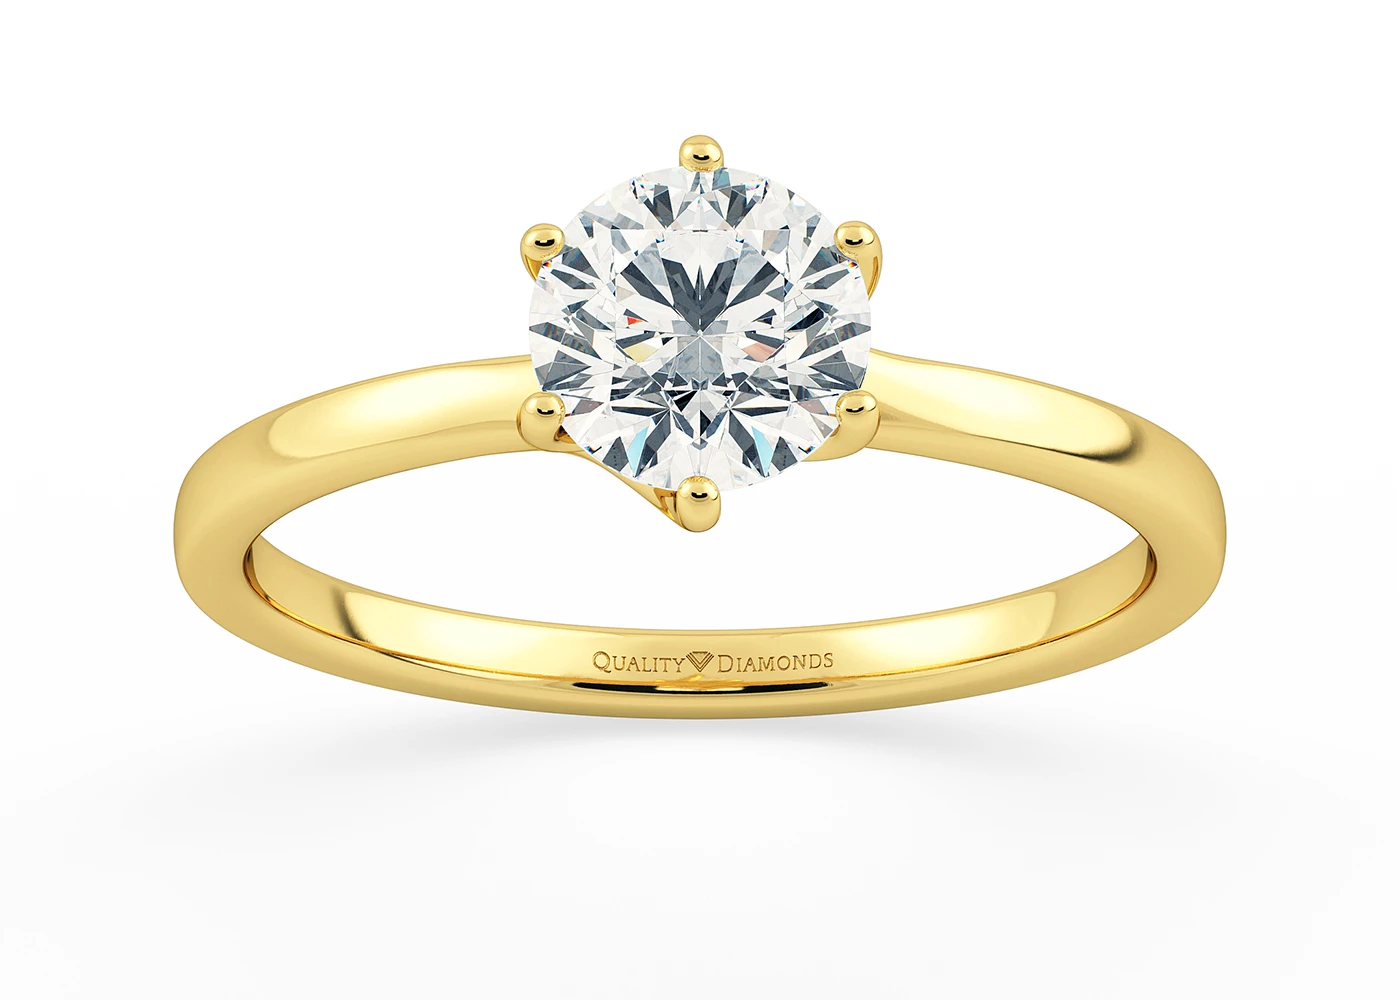 Six Claw Round Brilliant Cura Diamond Ring in 9K Yellow Gold